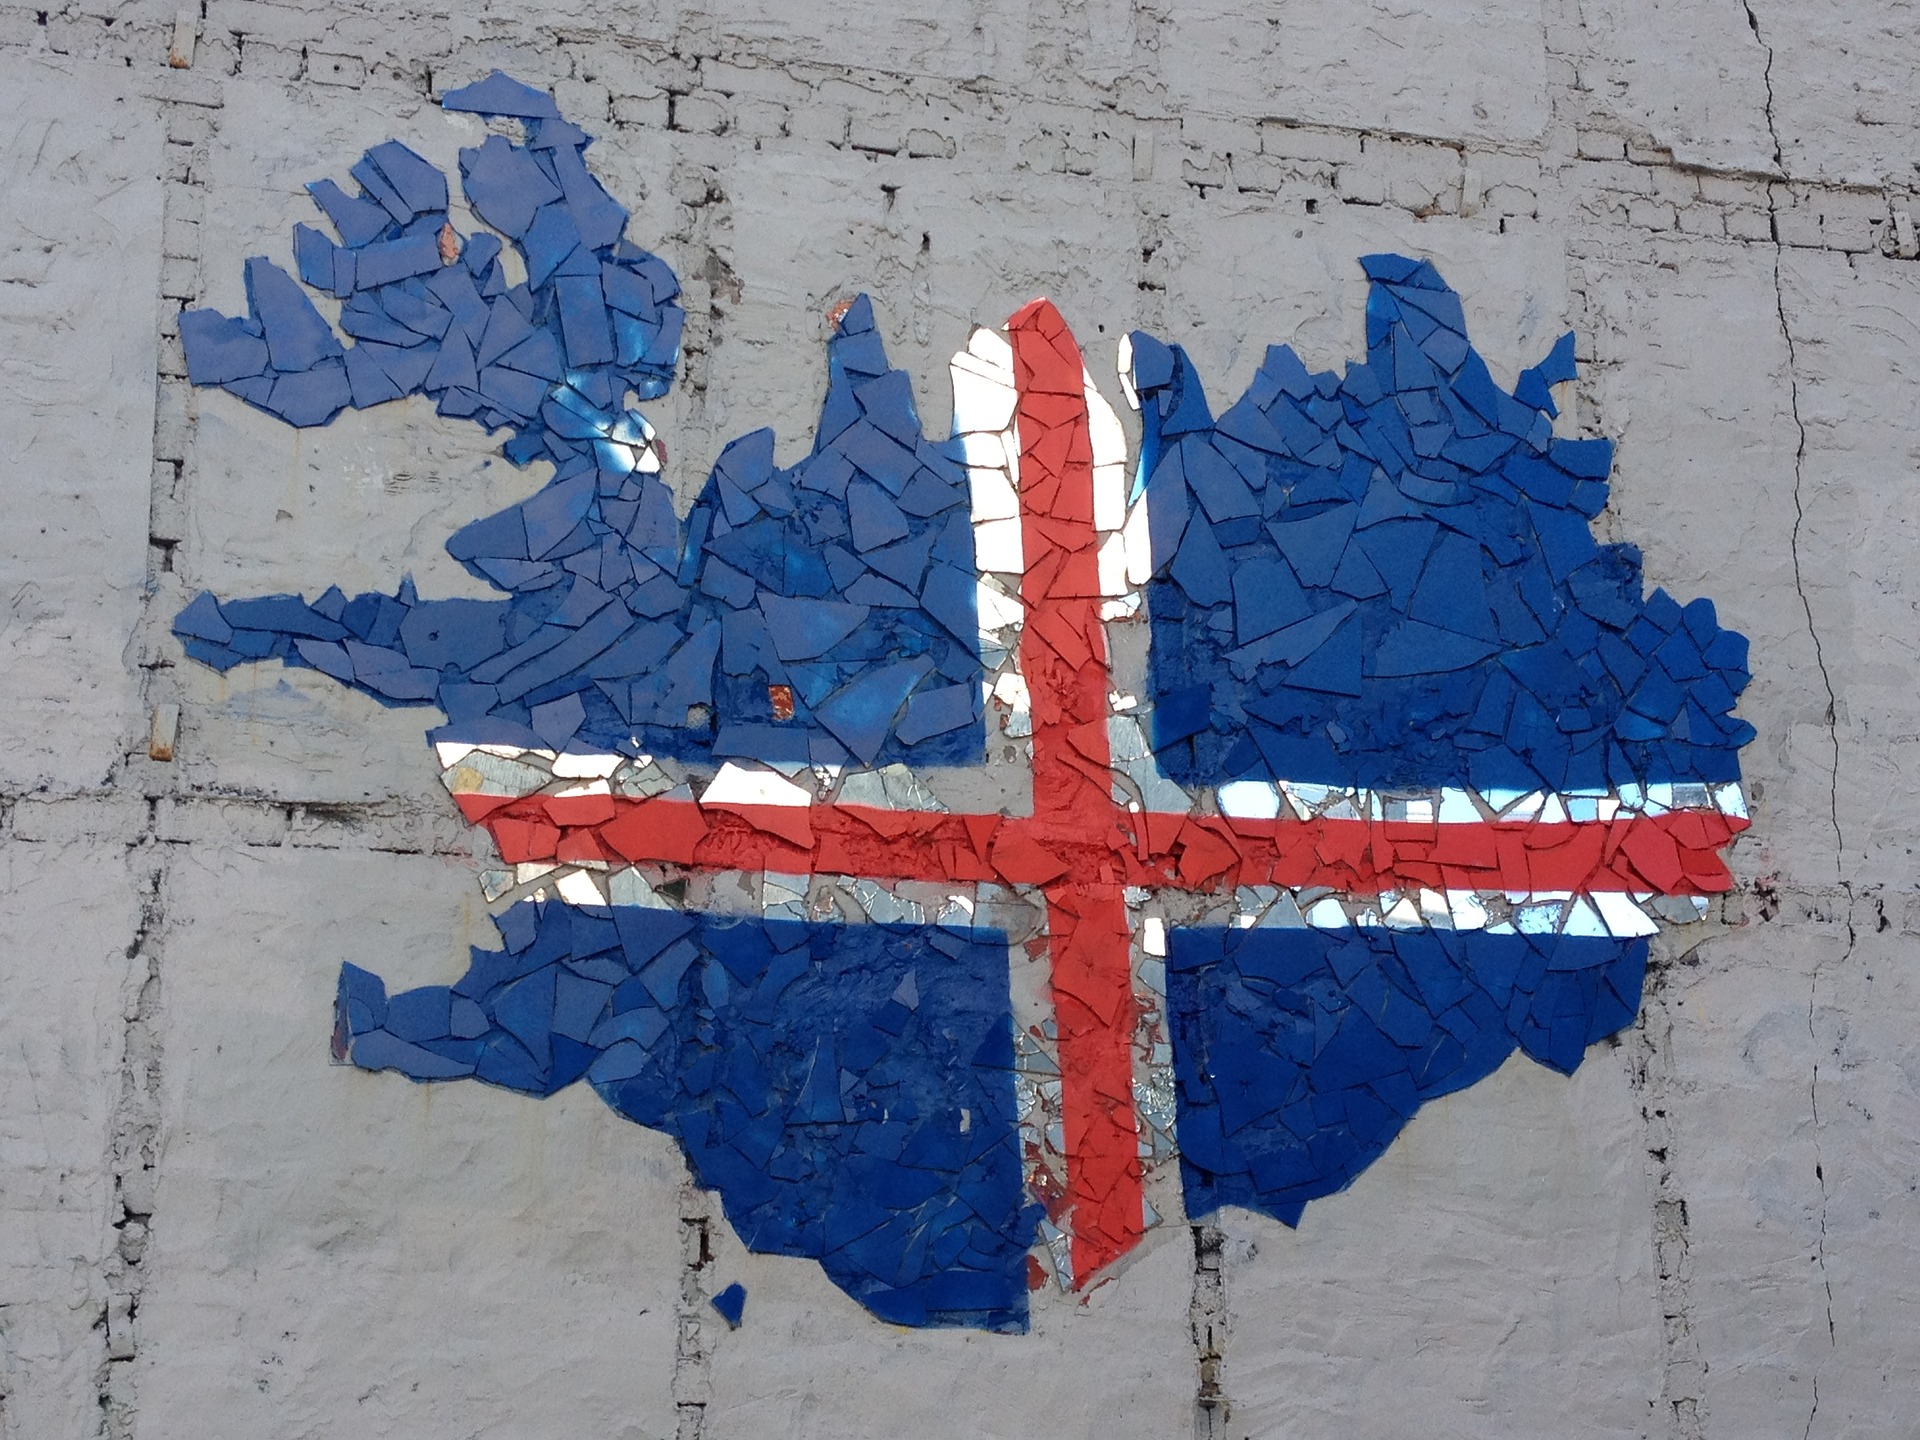 street art representing the icelandic flag on a wall in Reykjavik Iceland